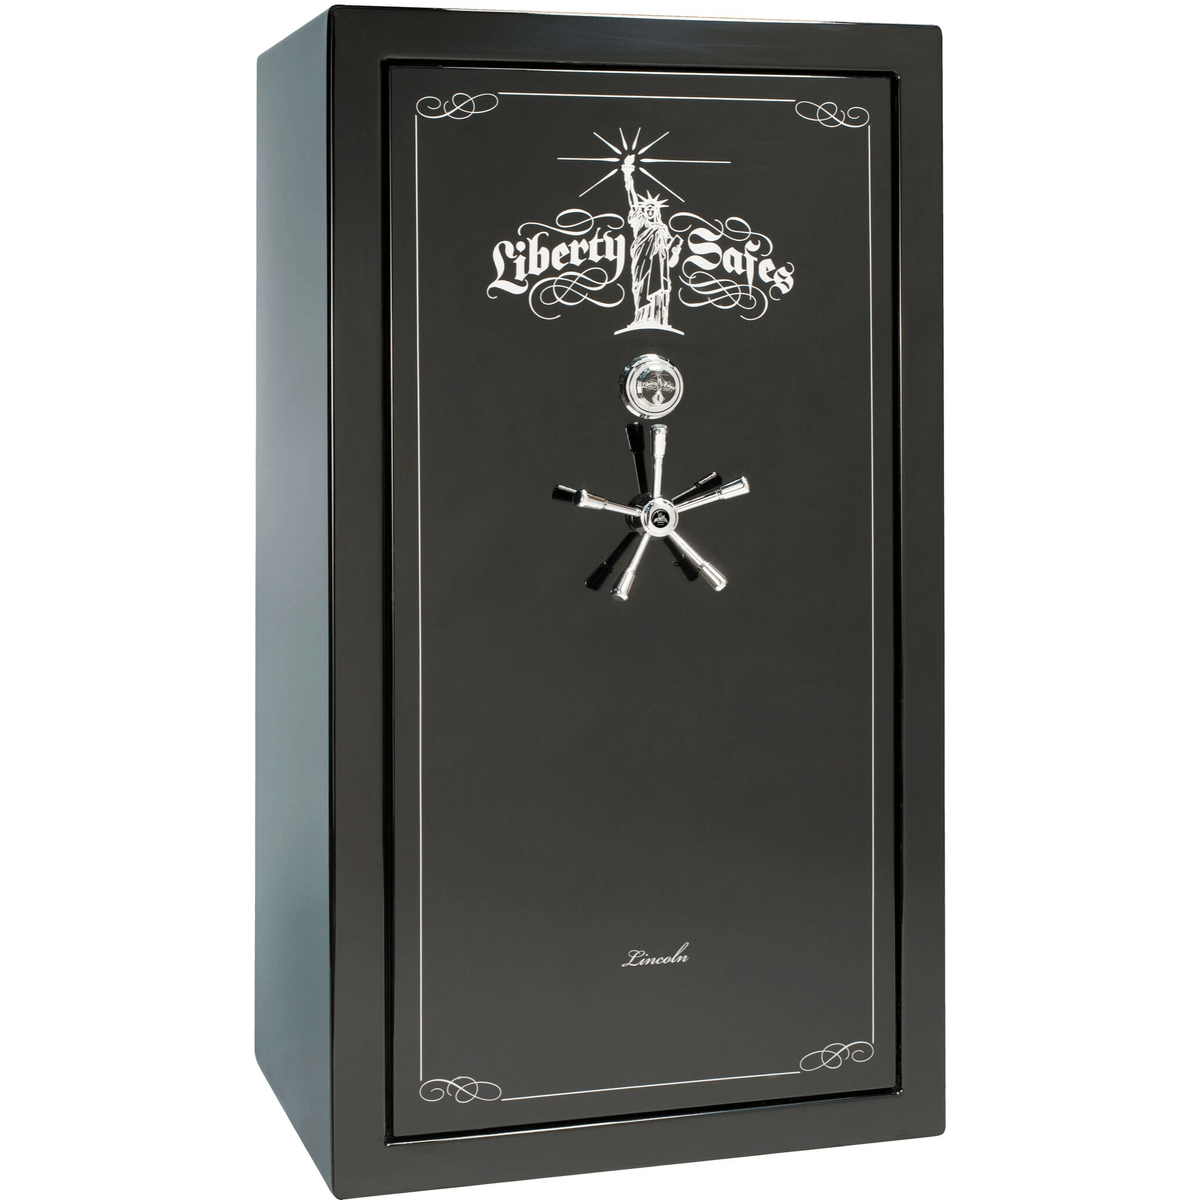 Liberty Lincoln 40 Safe in Black Gloss with Chrome Mechanical Lock.